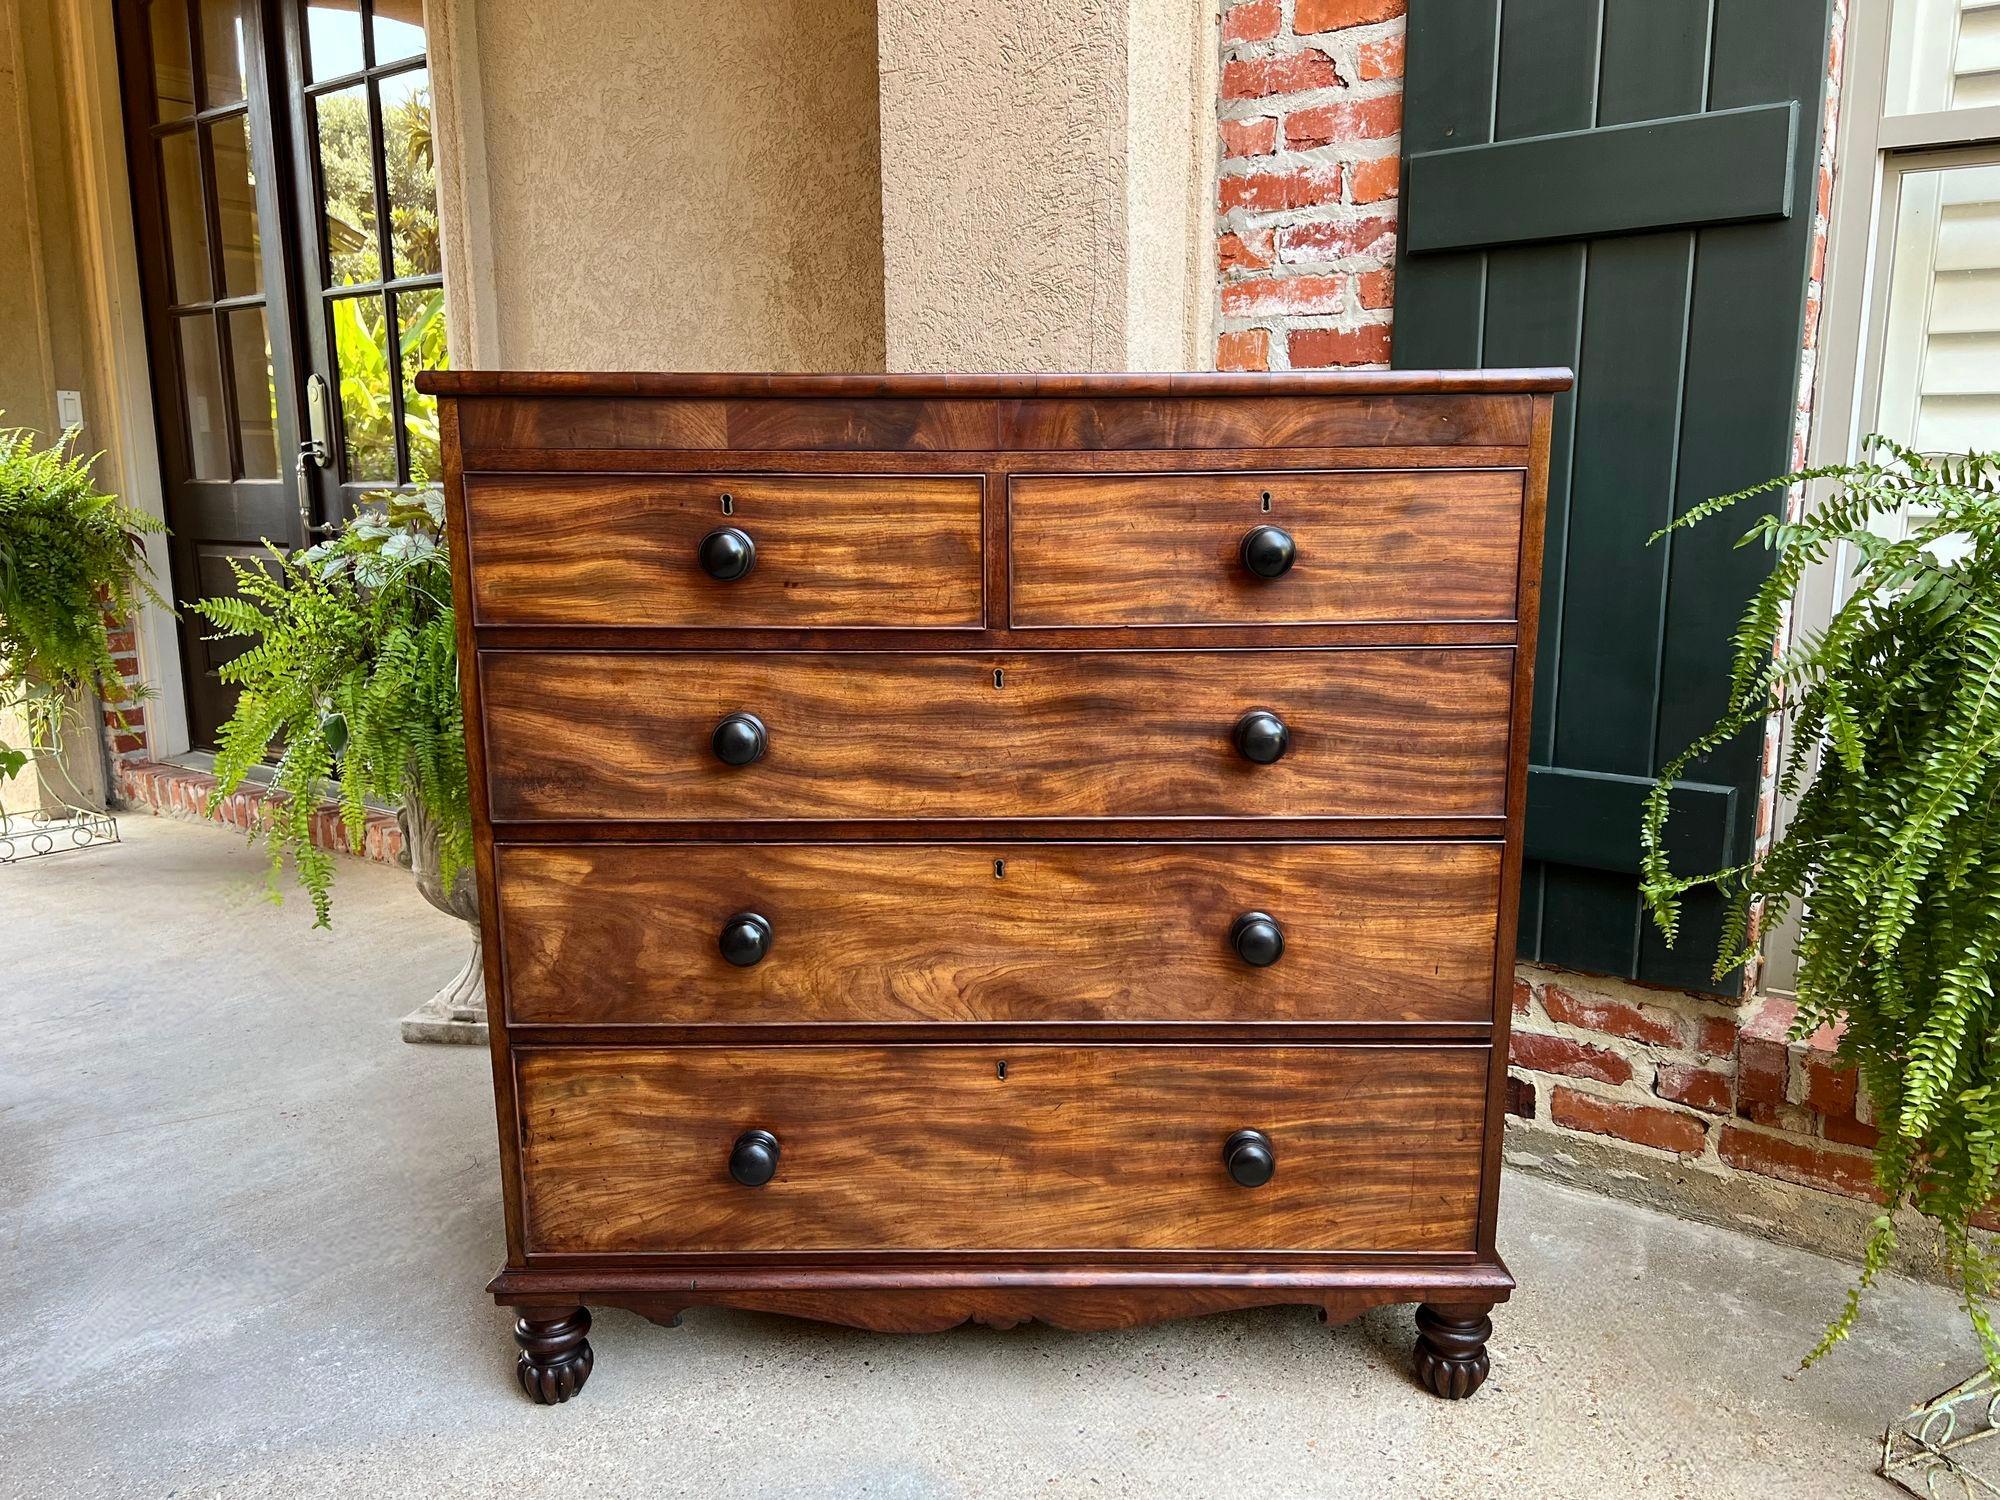 British Antique English Chest of Drawers Burl Mahogany Victorian Dresser Cabinet For Sale